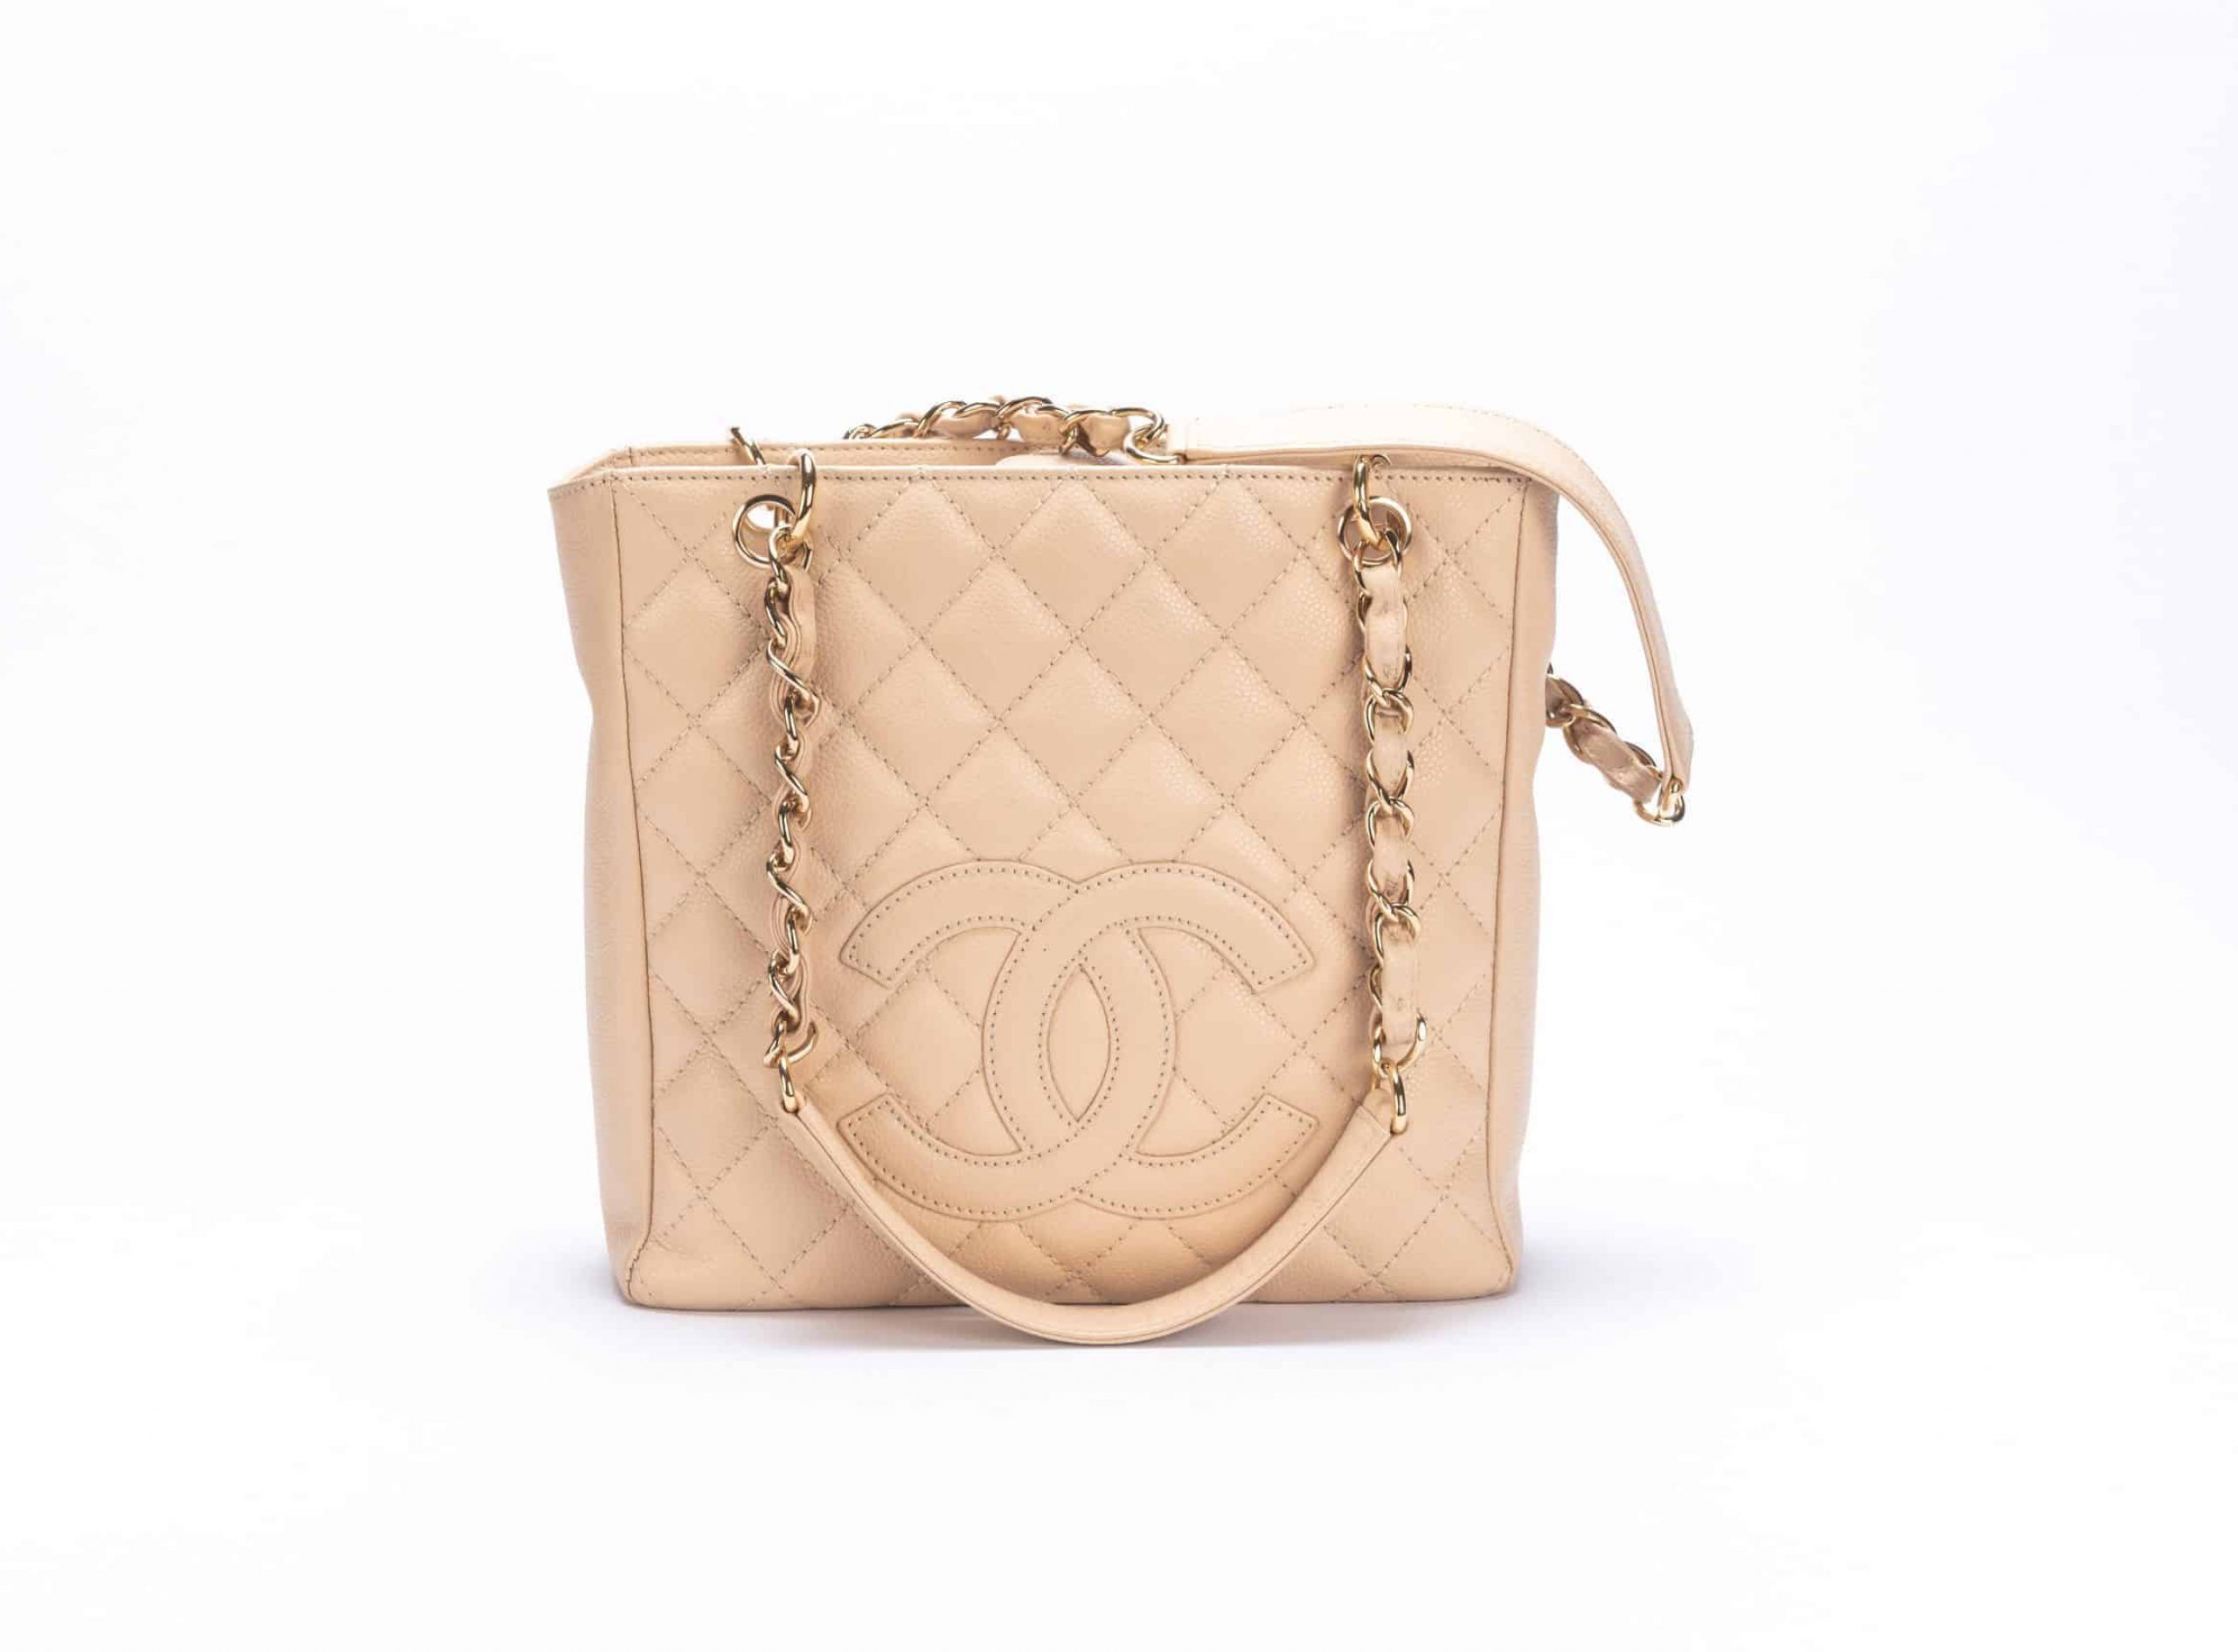 Chanel PST Caviar Quilted Bag in Light Beige with Gold Hardware - 1